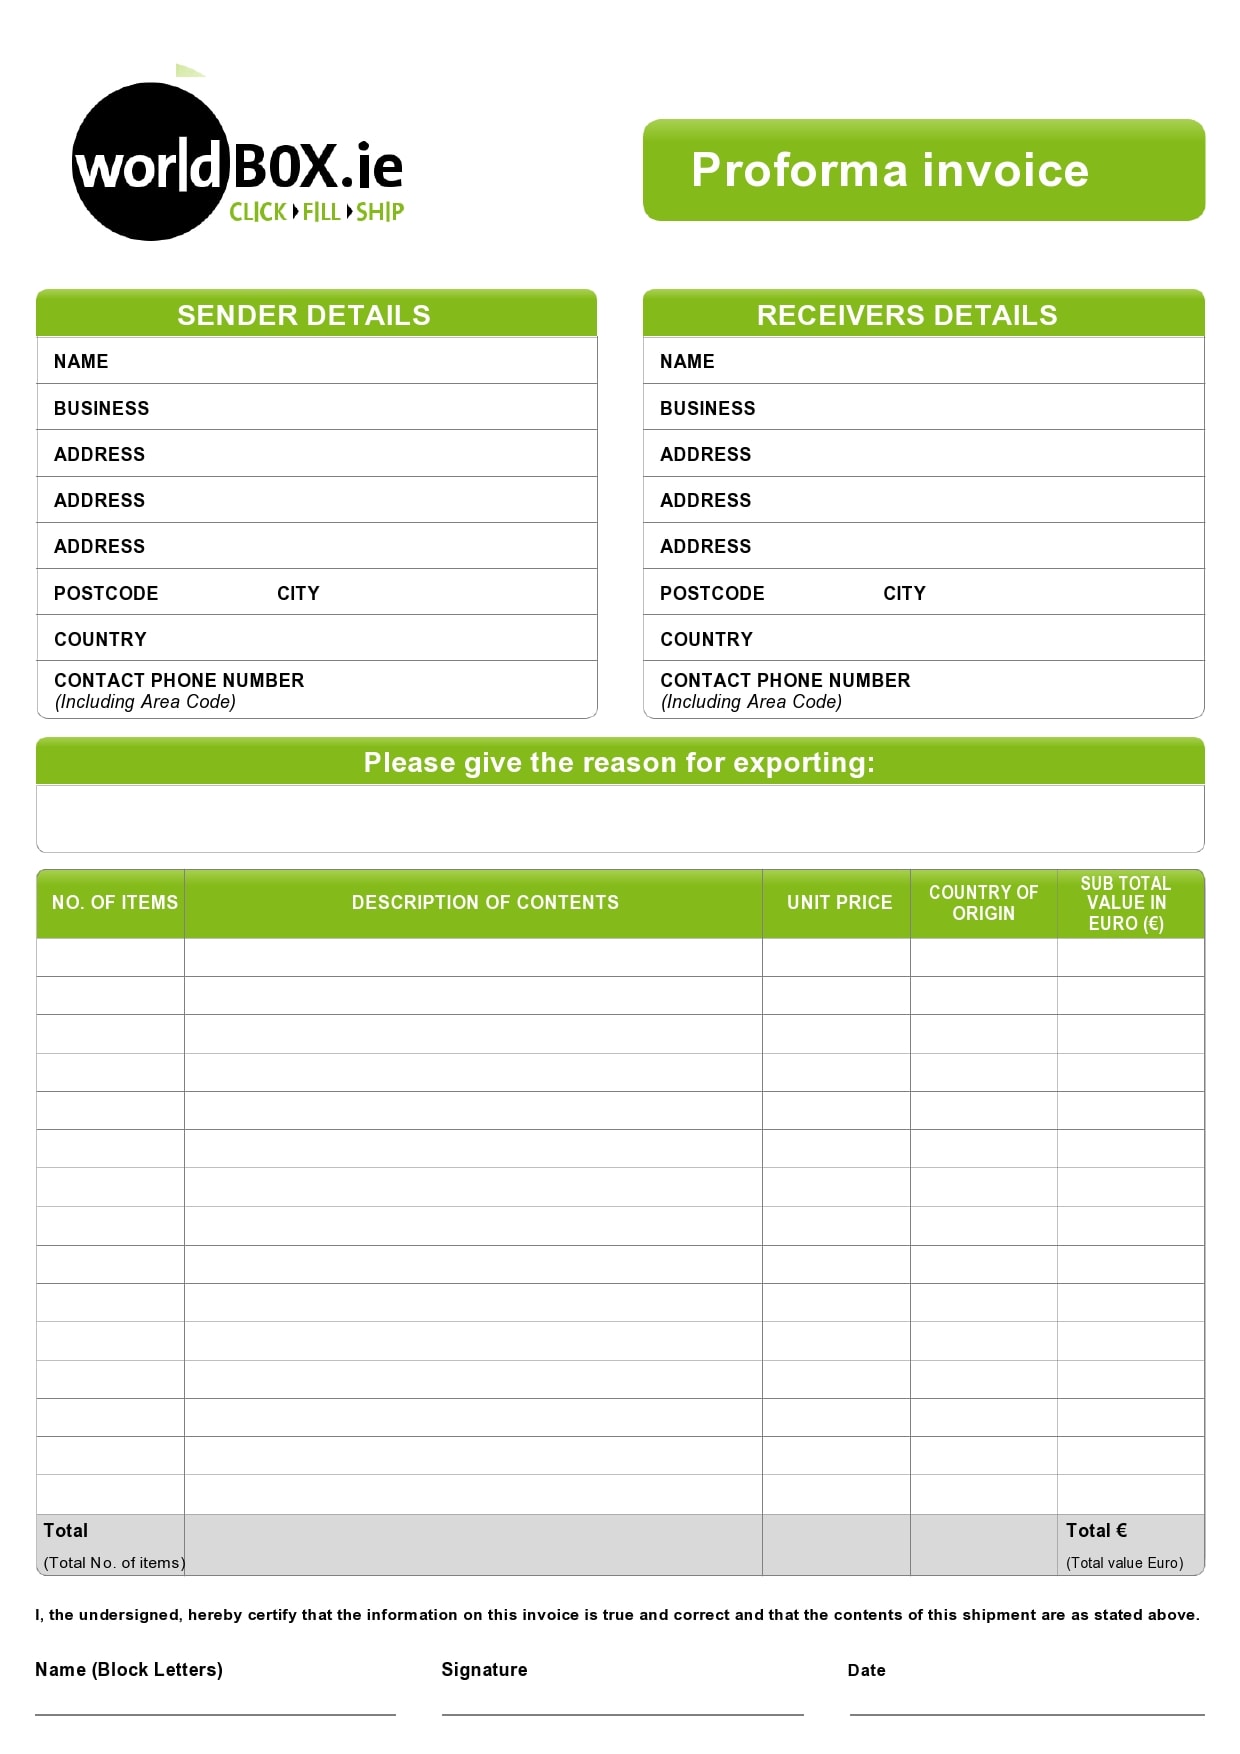 30 Free Proforma Invoice Templates Excel Word Pdf Templatearchive